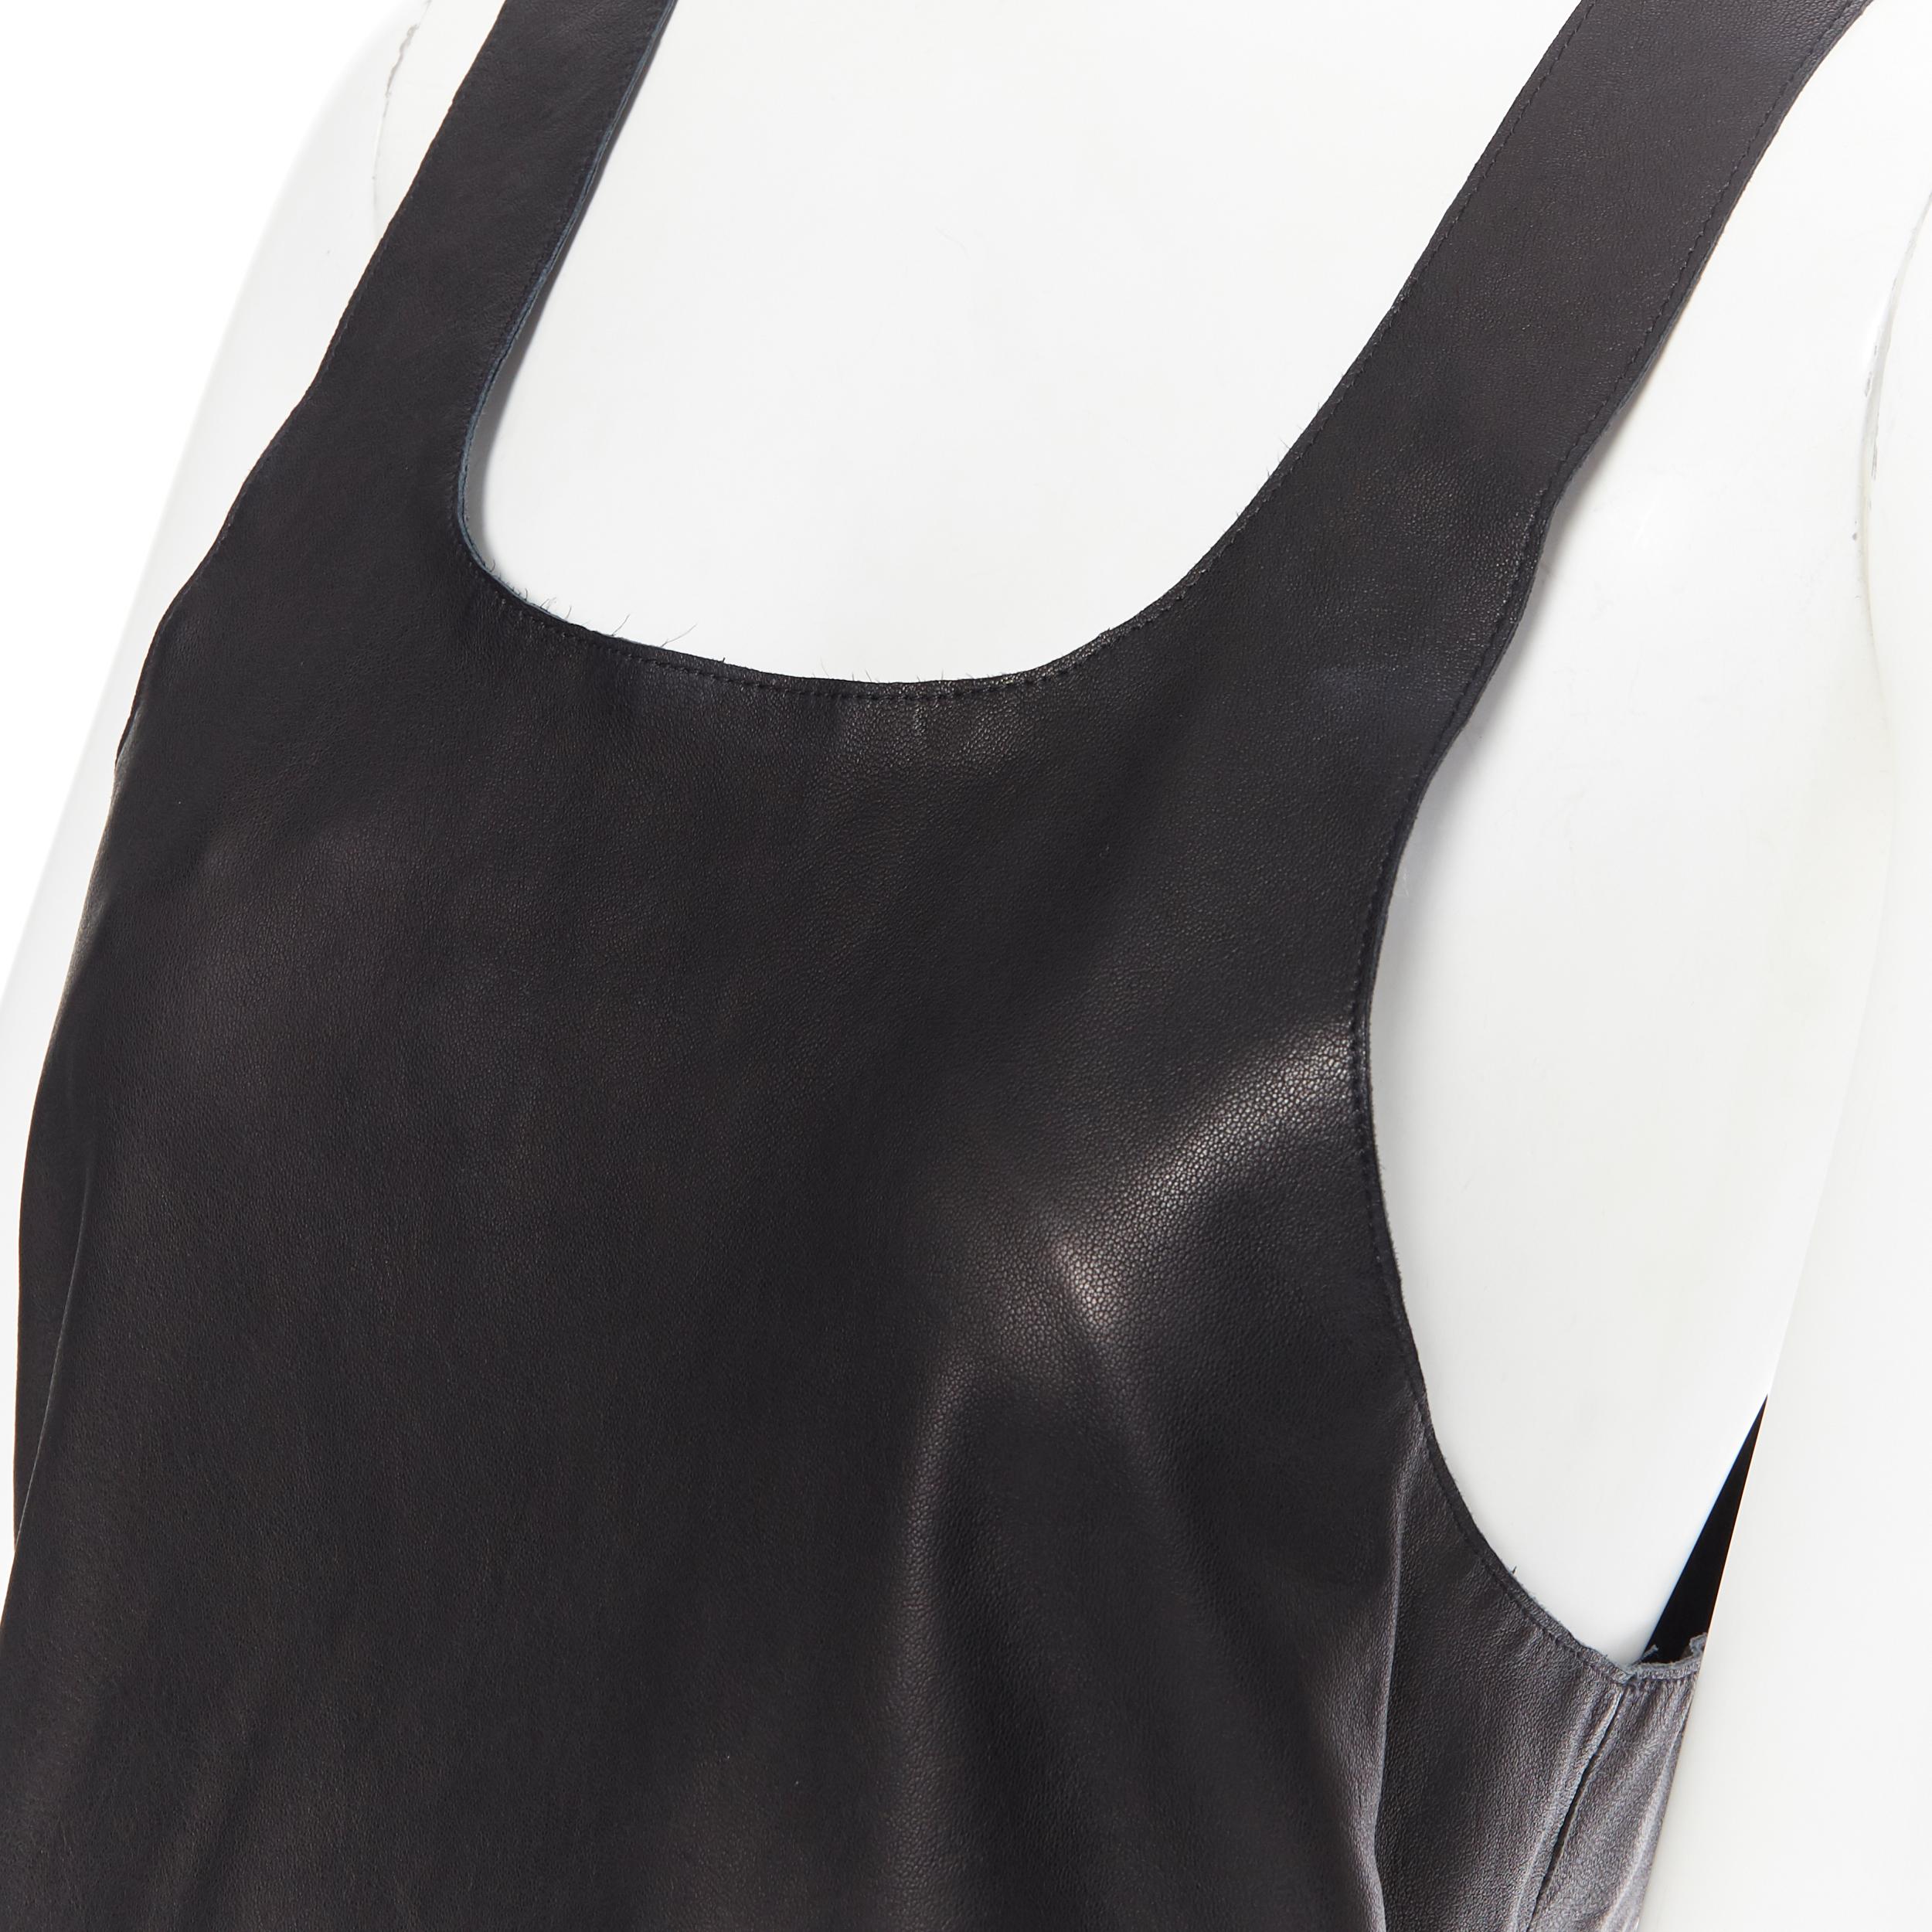 HAIDER ACKERMANN 100% genuine leather black scoop neck tunic vest top FR36 
Reference: CNPG/A00004 
Brand: Haider Ackermann 
Designer: Haider Ackermann 
Material: Leather 
Color: Black 
Pattern: Solid 
Made in: Italy 

CONDITION: 
Condition: Very